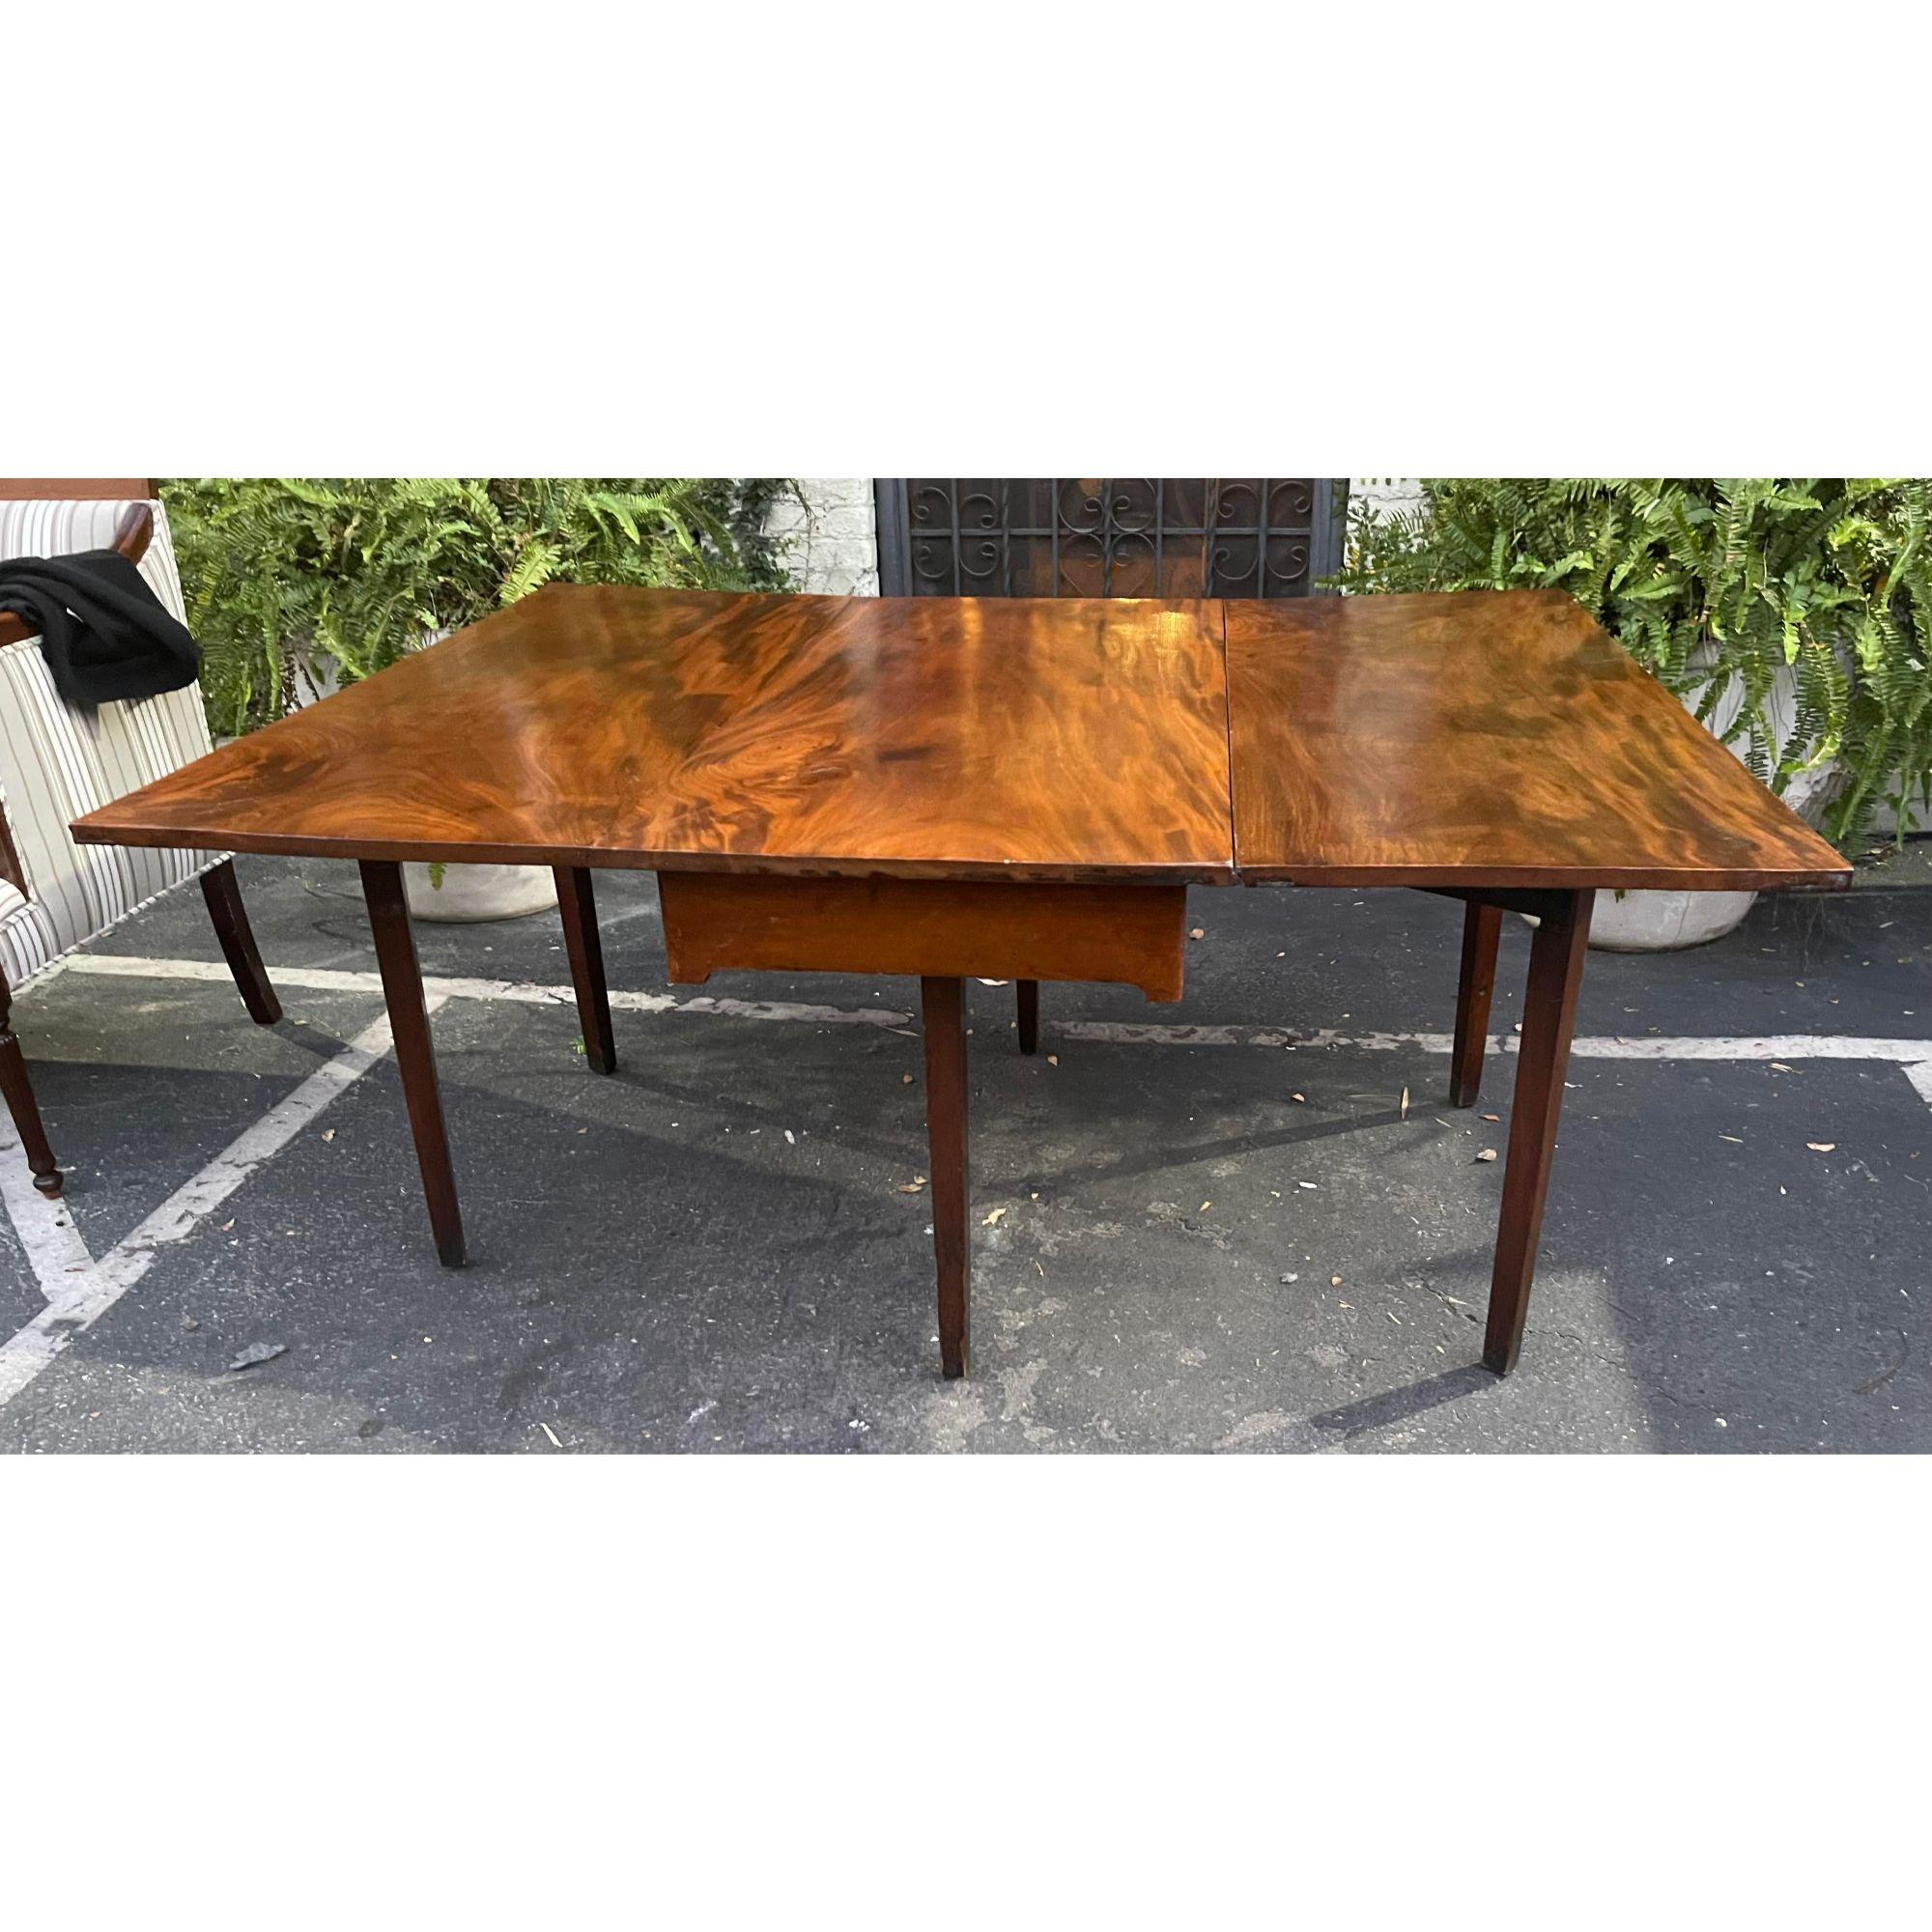 Antique English Honduran Mahogany Drop Lead Dining Table, Early 18th Century In Good Condition For Sale In LOS ANGELES, CA